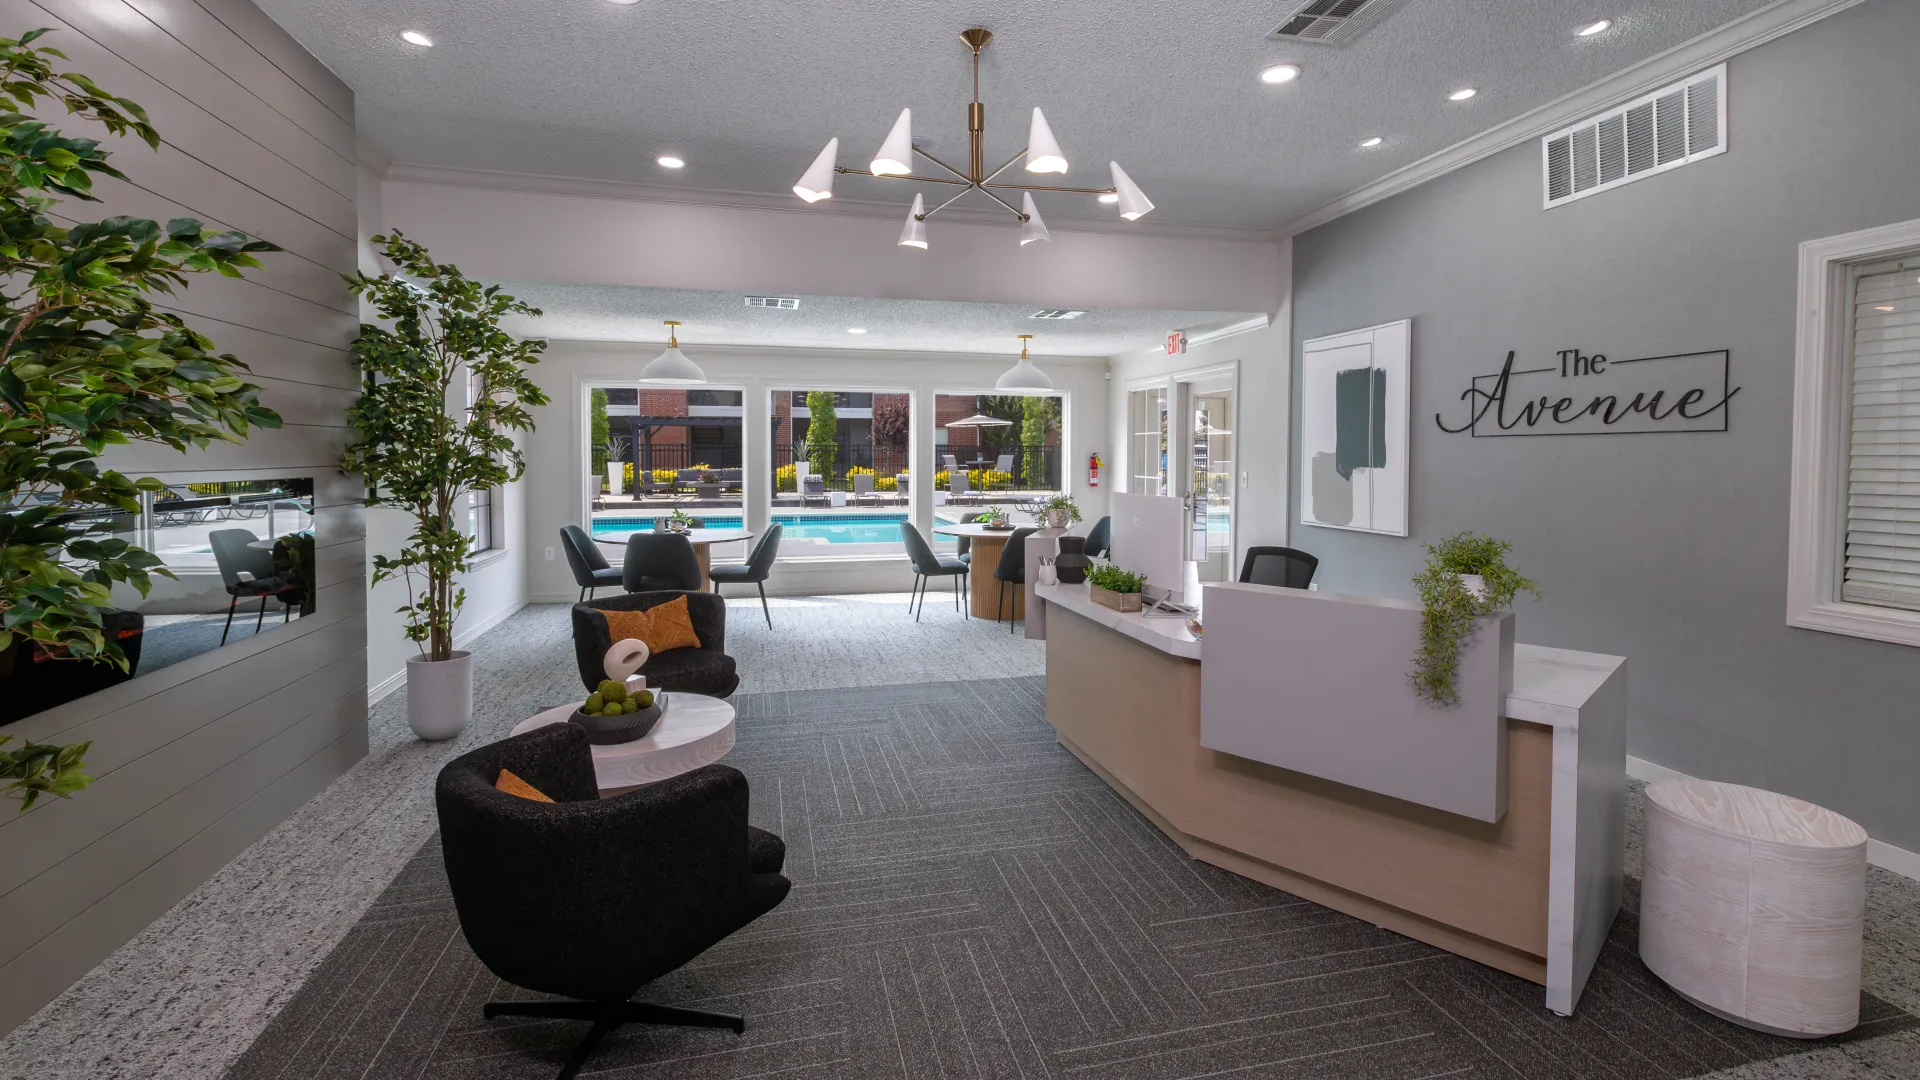 Interior view of The Avenue's leasing office featuring modern decor, comfortable seating, and large windows overlooking the pool area.